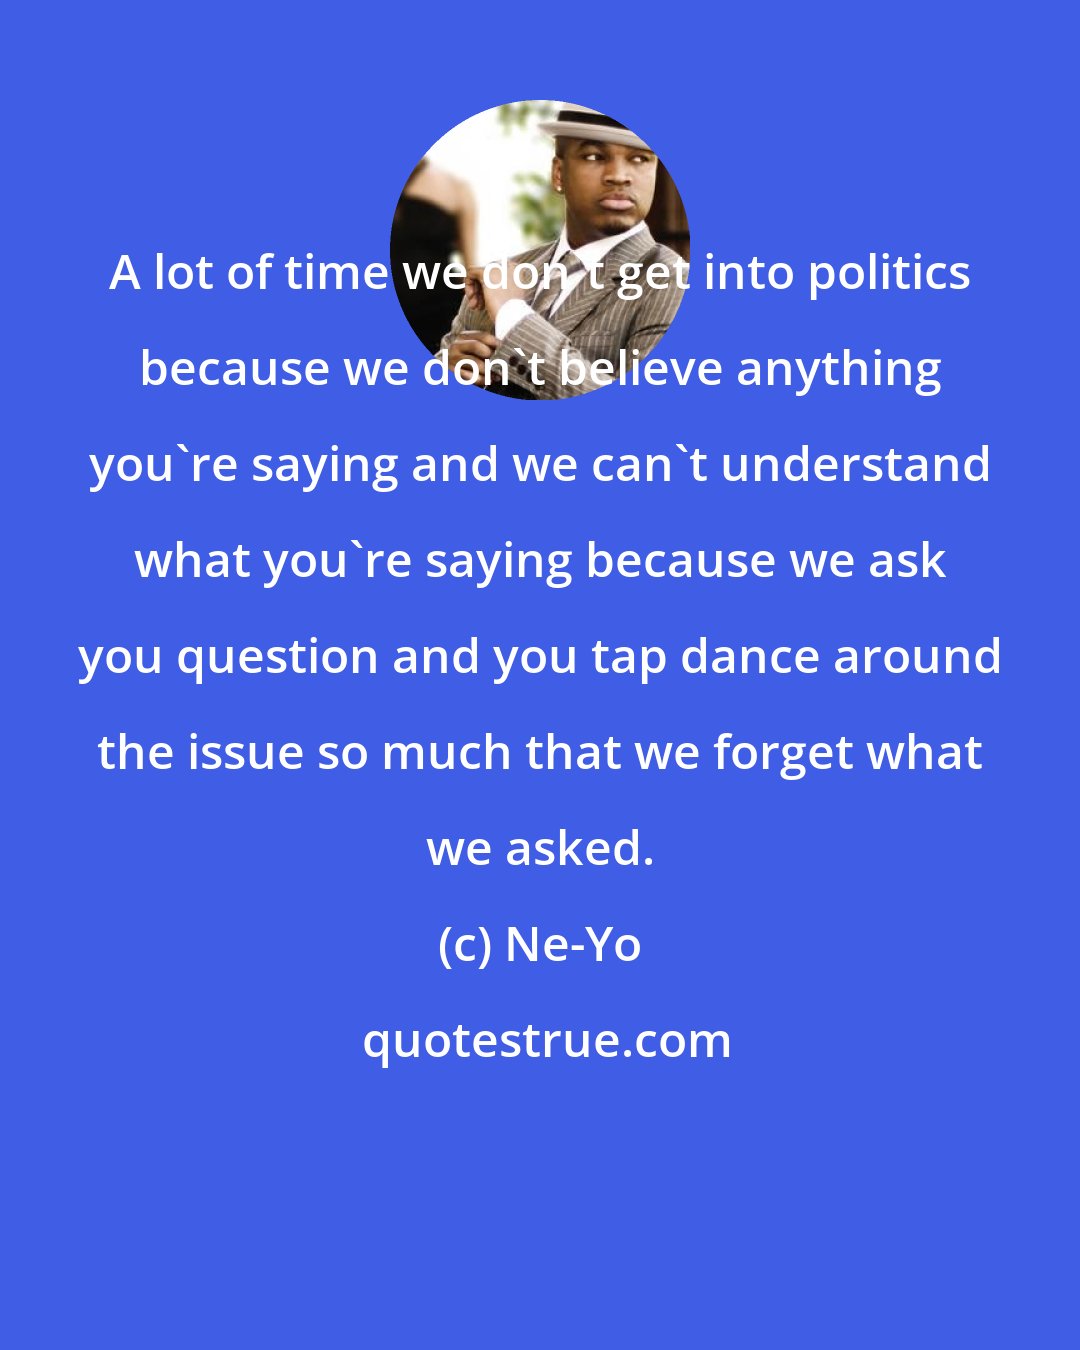 Ne-Yo: A lot of time we don't get into politics because we don't believe anything you're saying and we can't understand what you're saying because we ask you question and you tap dance around the issue so much that we forget what we asked.